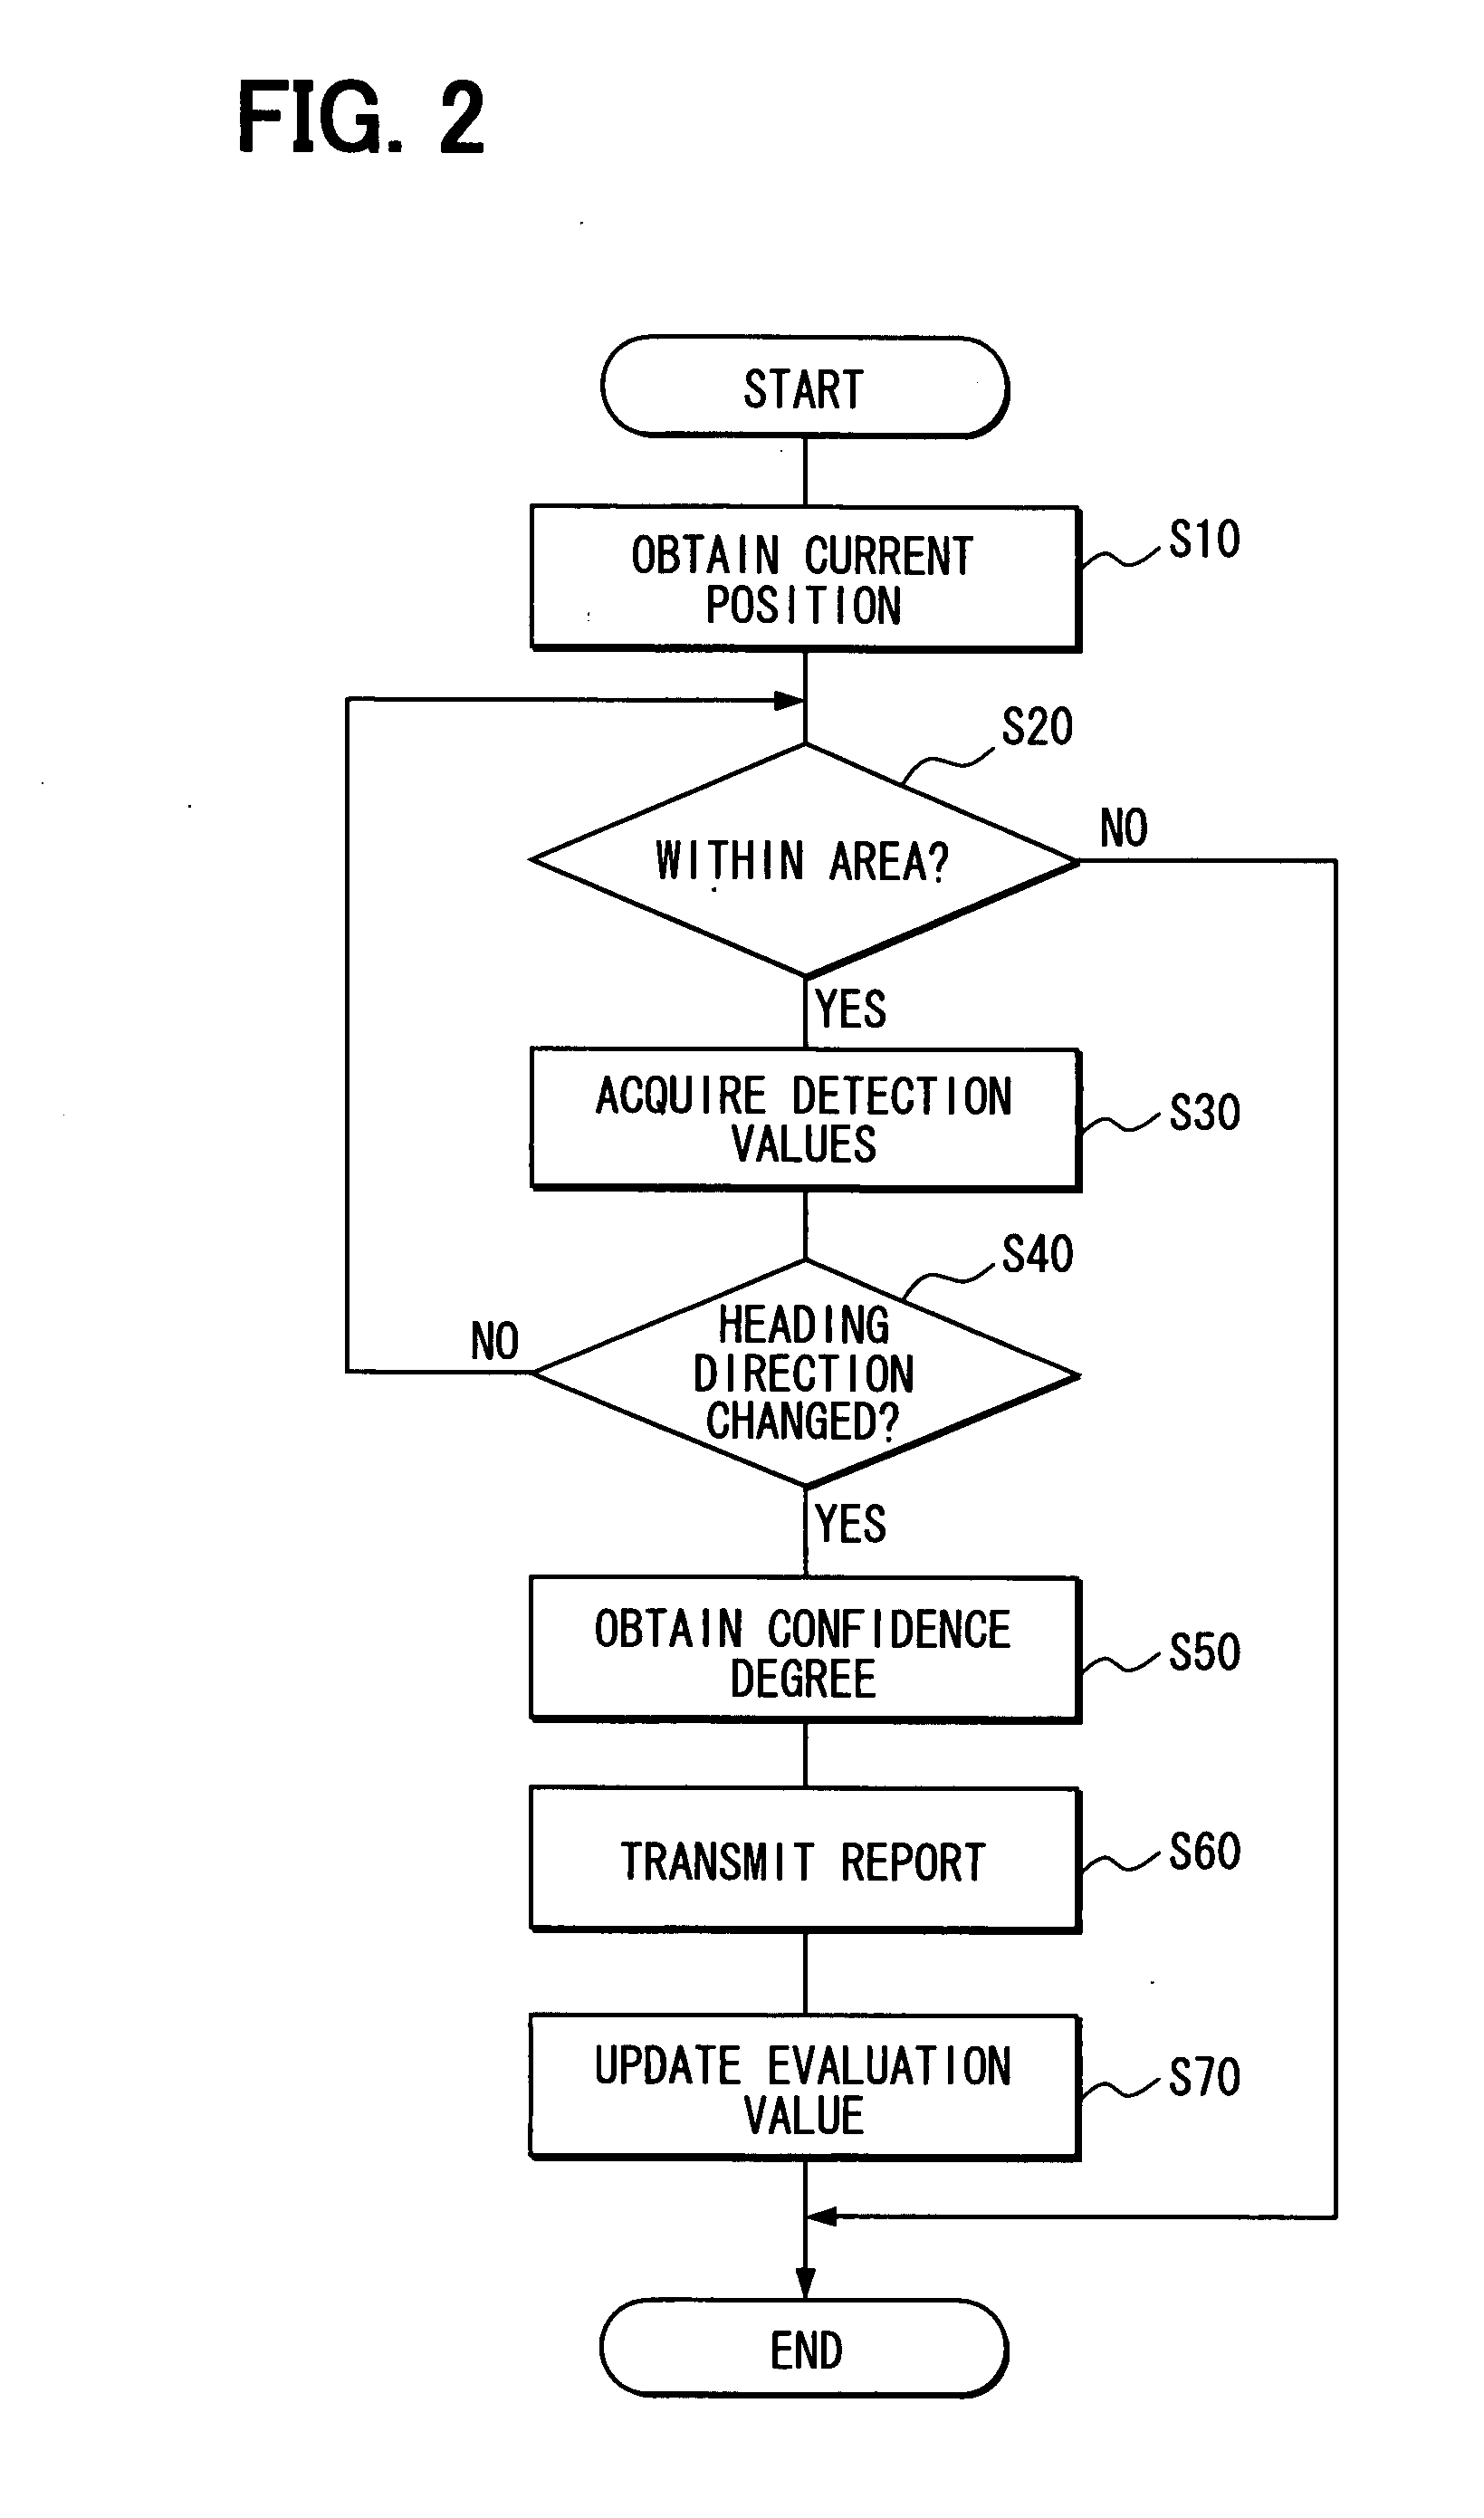 Positional information use apparatus